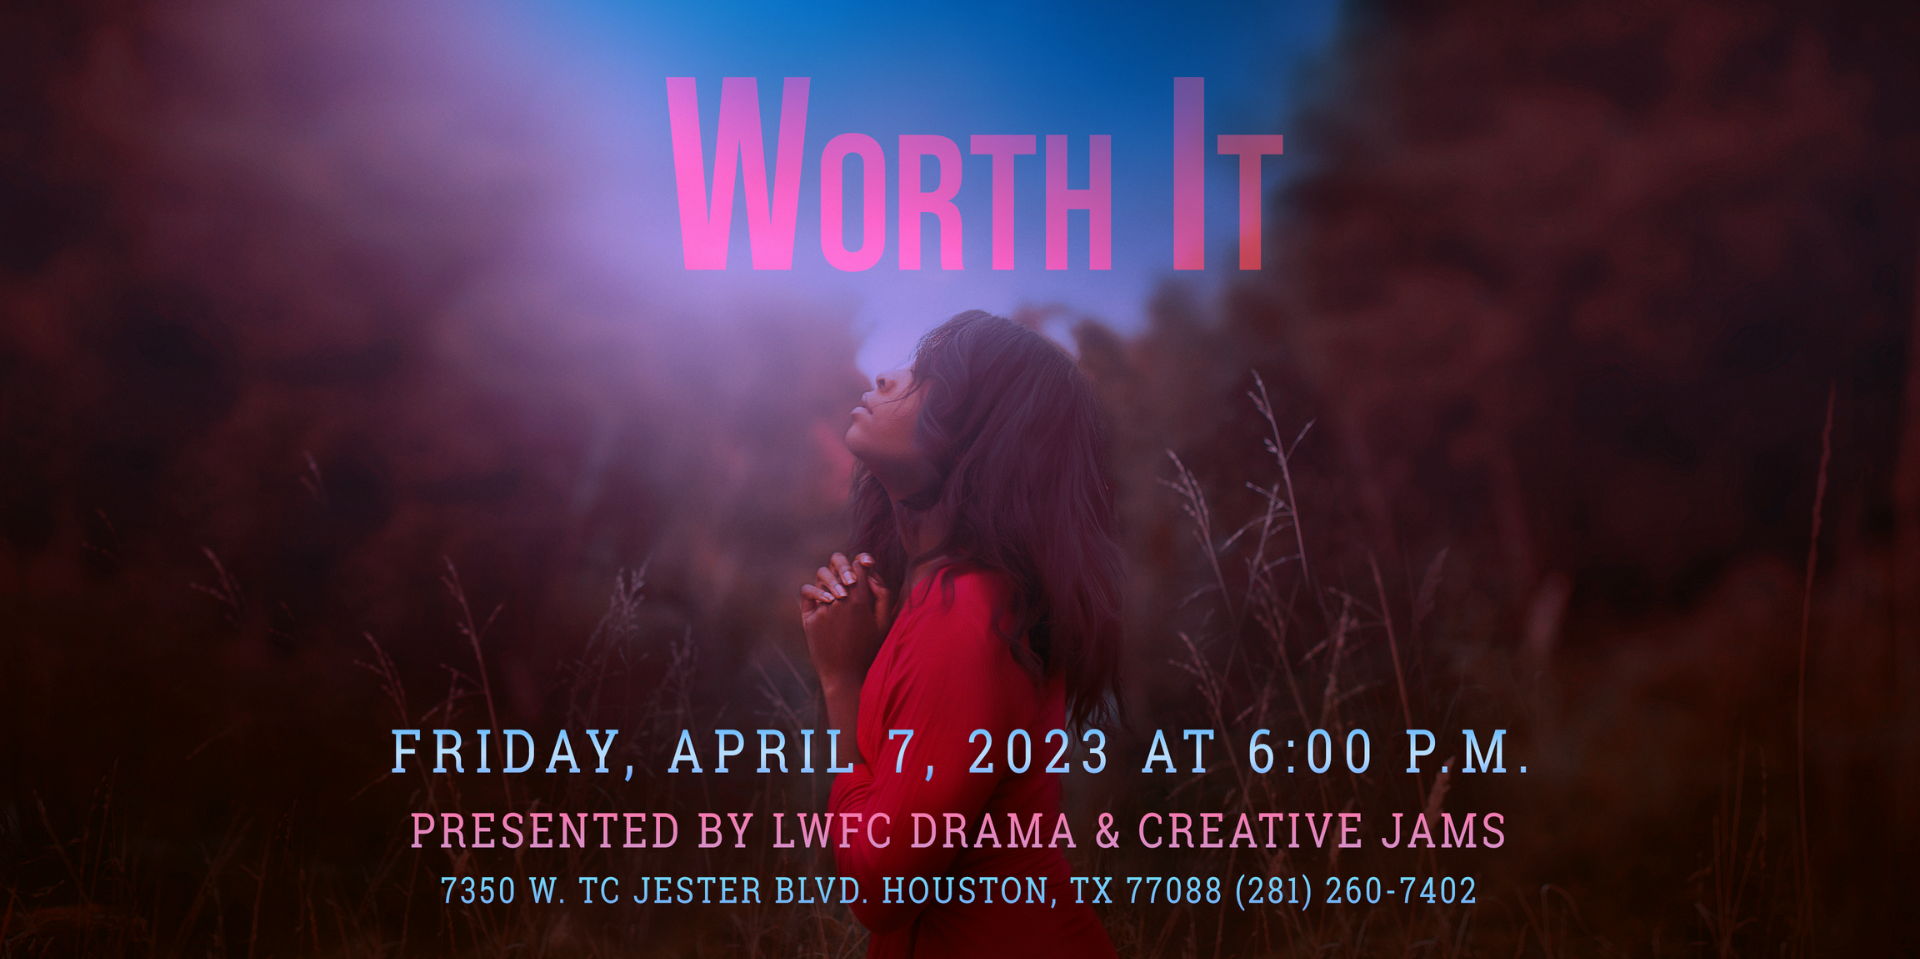 Good Friday Service - "Worth It" by LWFC Drama Ministry & Creative Jams promotional image